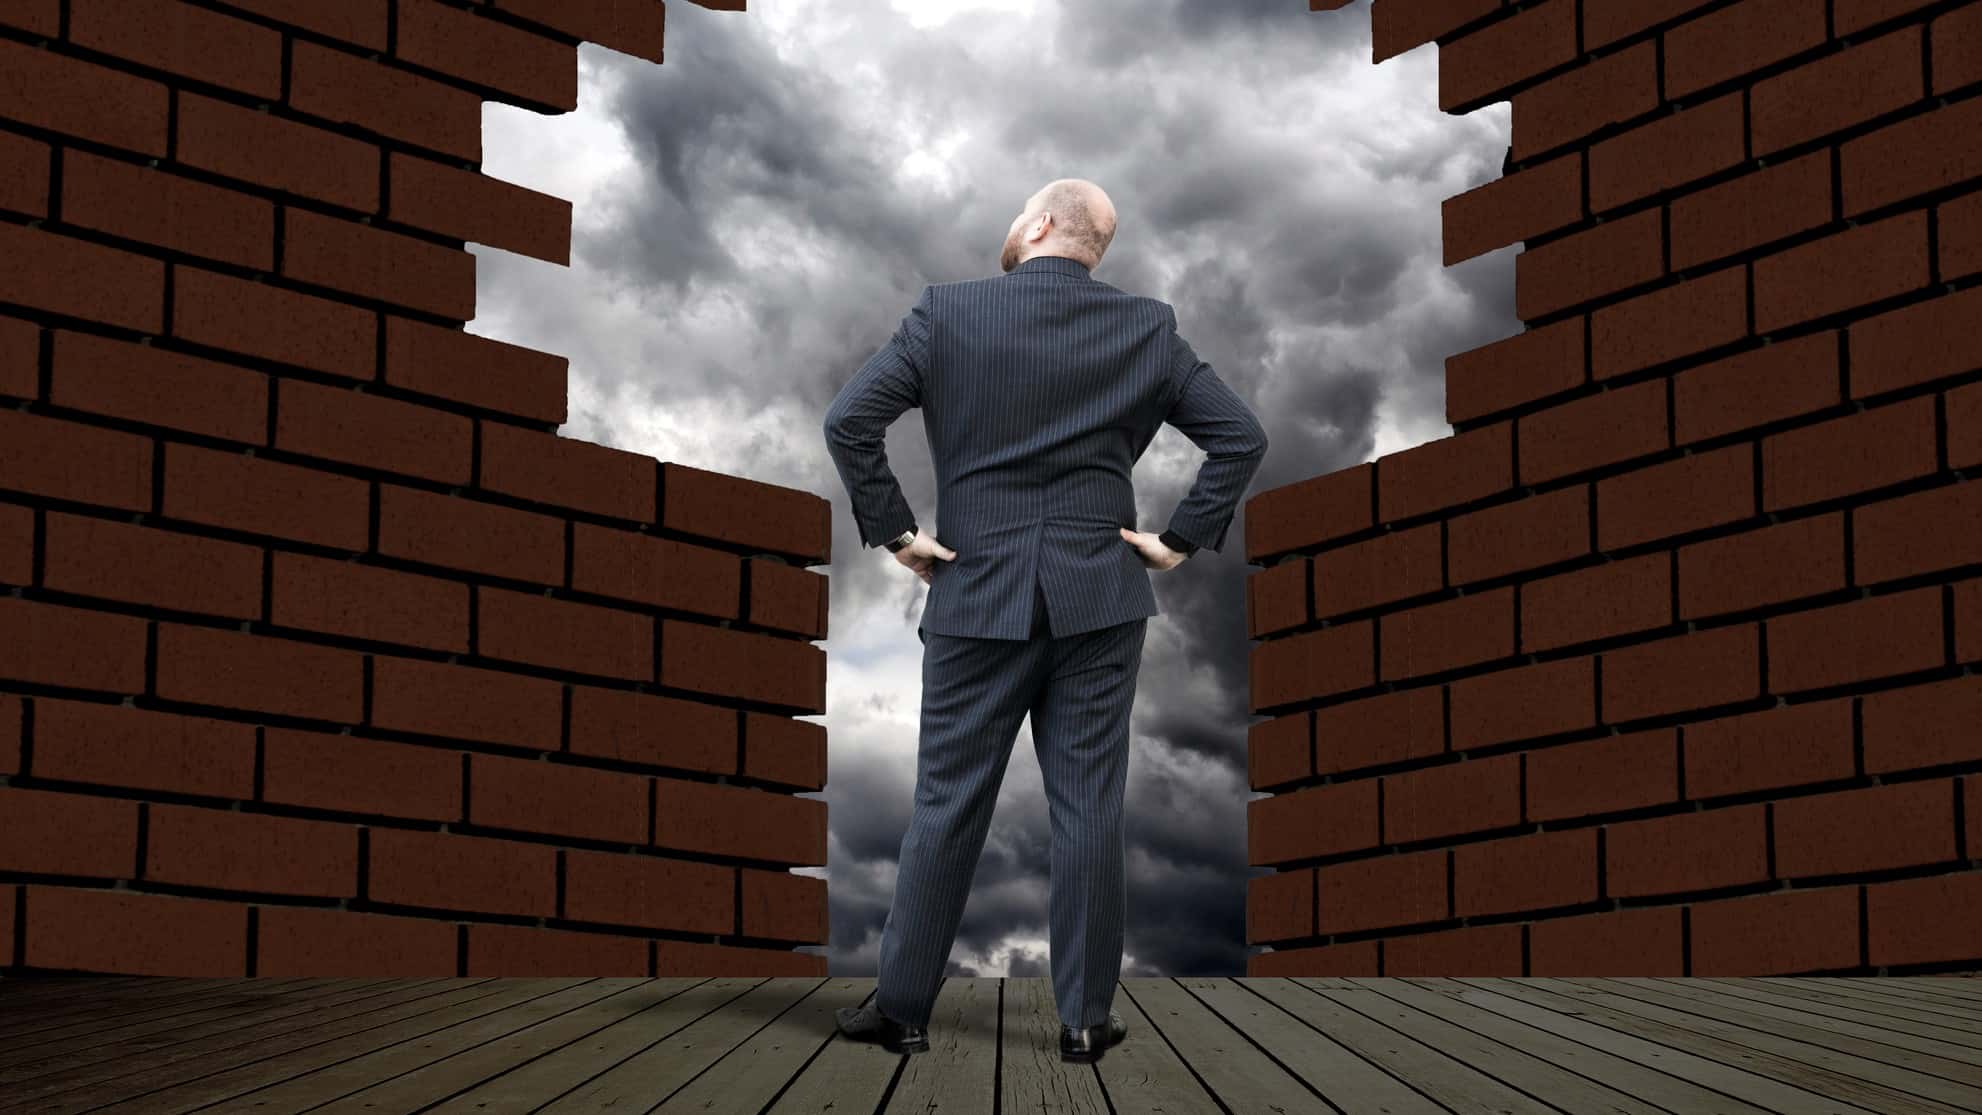 a man peers through a broken brick wall to see grey clouds gathering beyond it